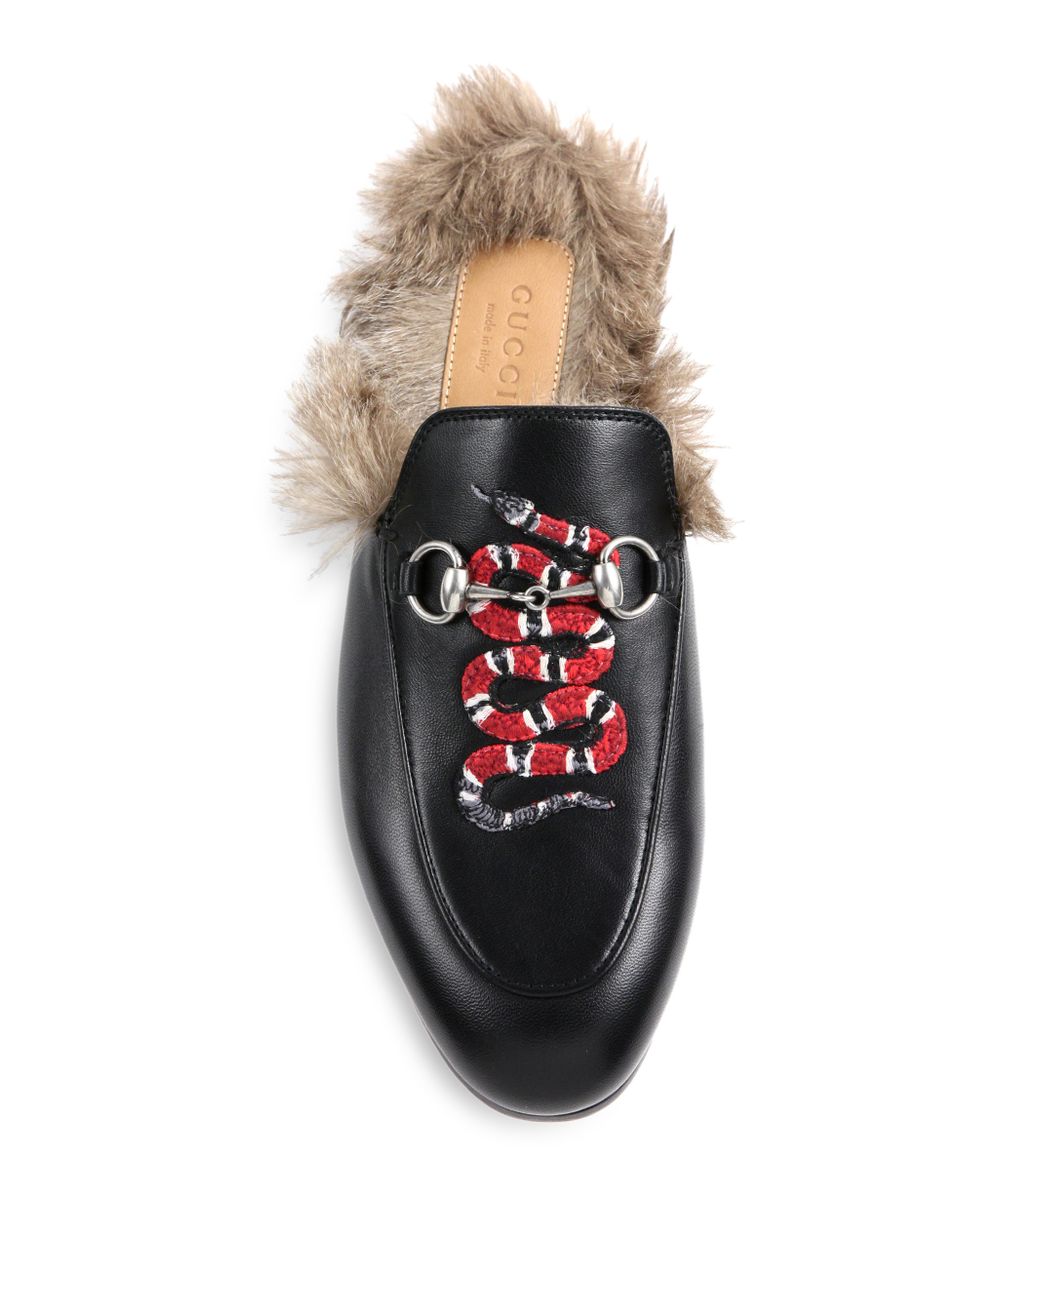 Gucci Princetown Fur-lined Snake Leather Slippers in Black | Lyst